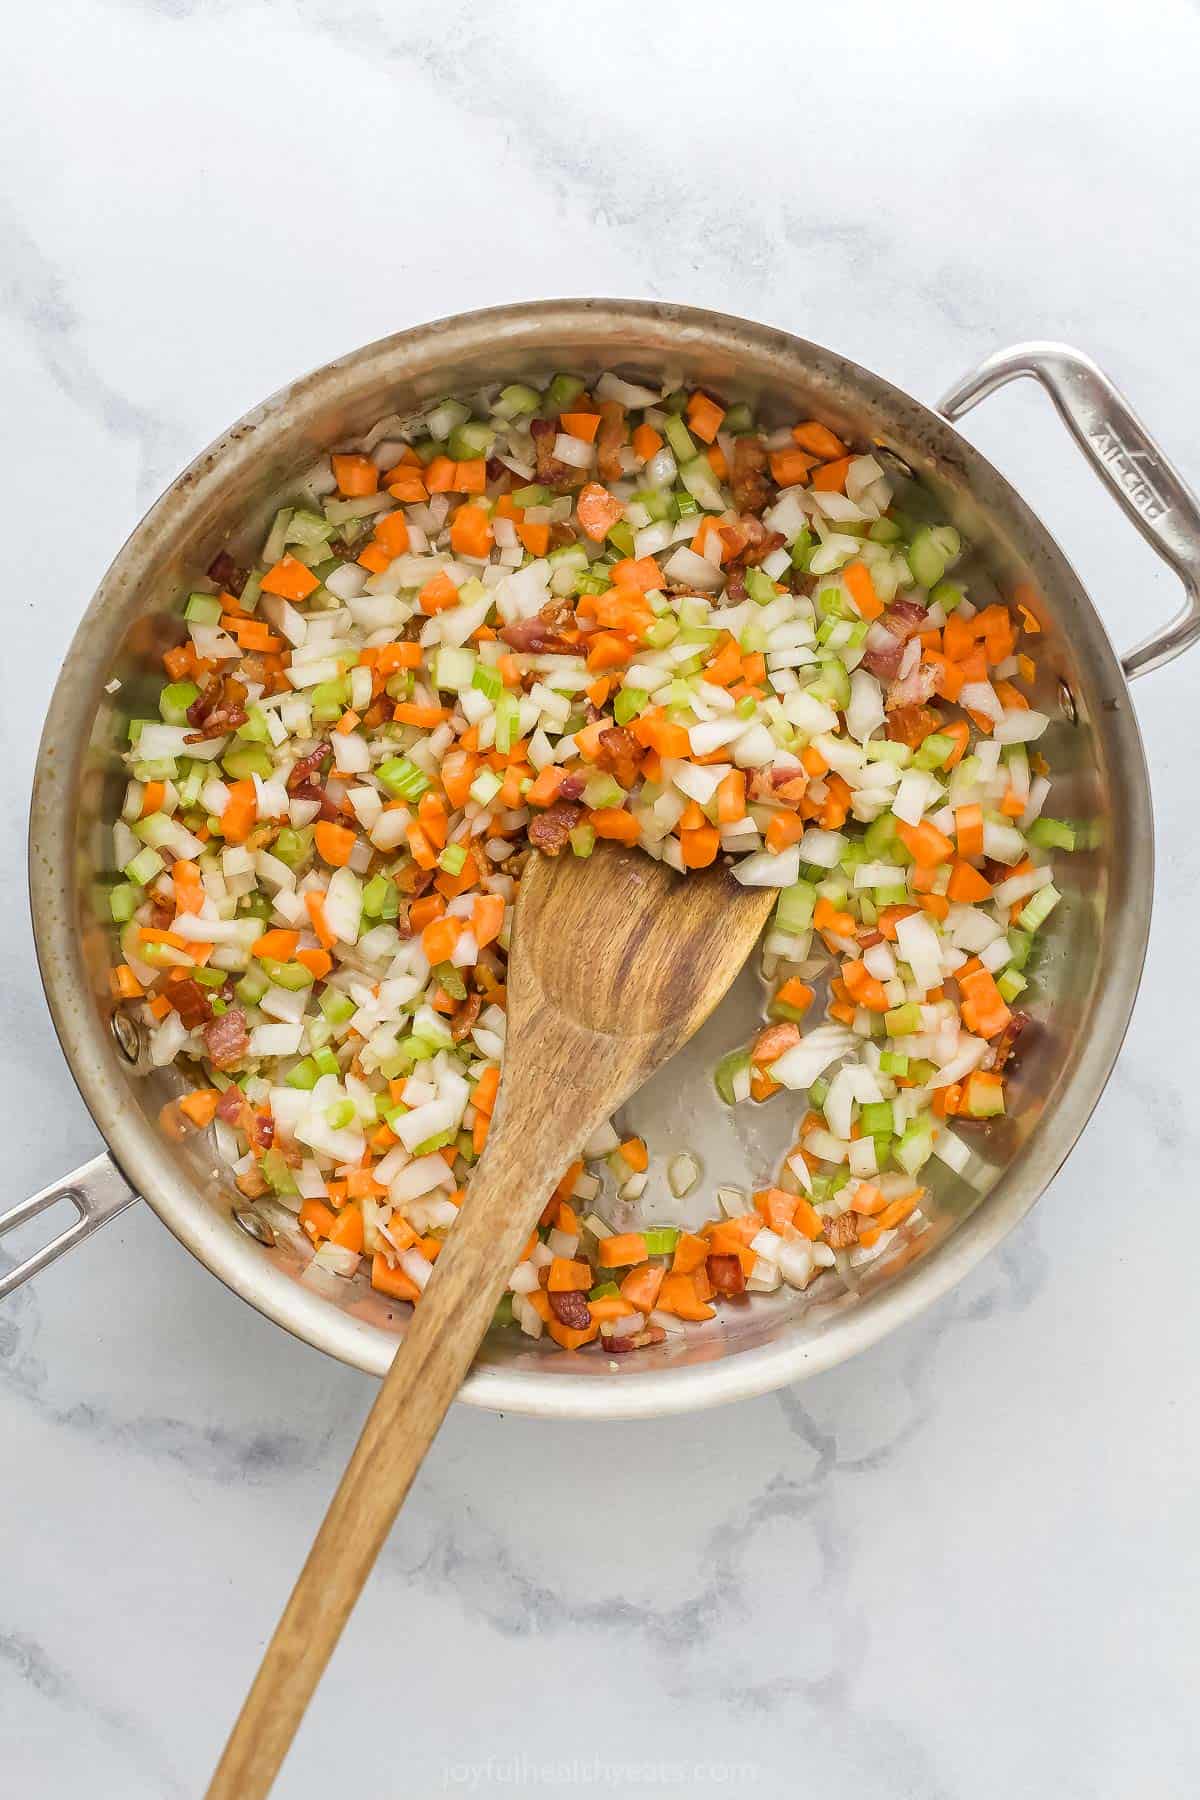 Carrots, onions, celery, and bacon in a saute pan